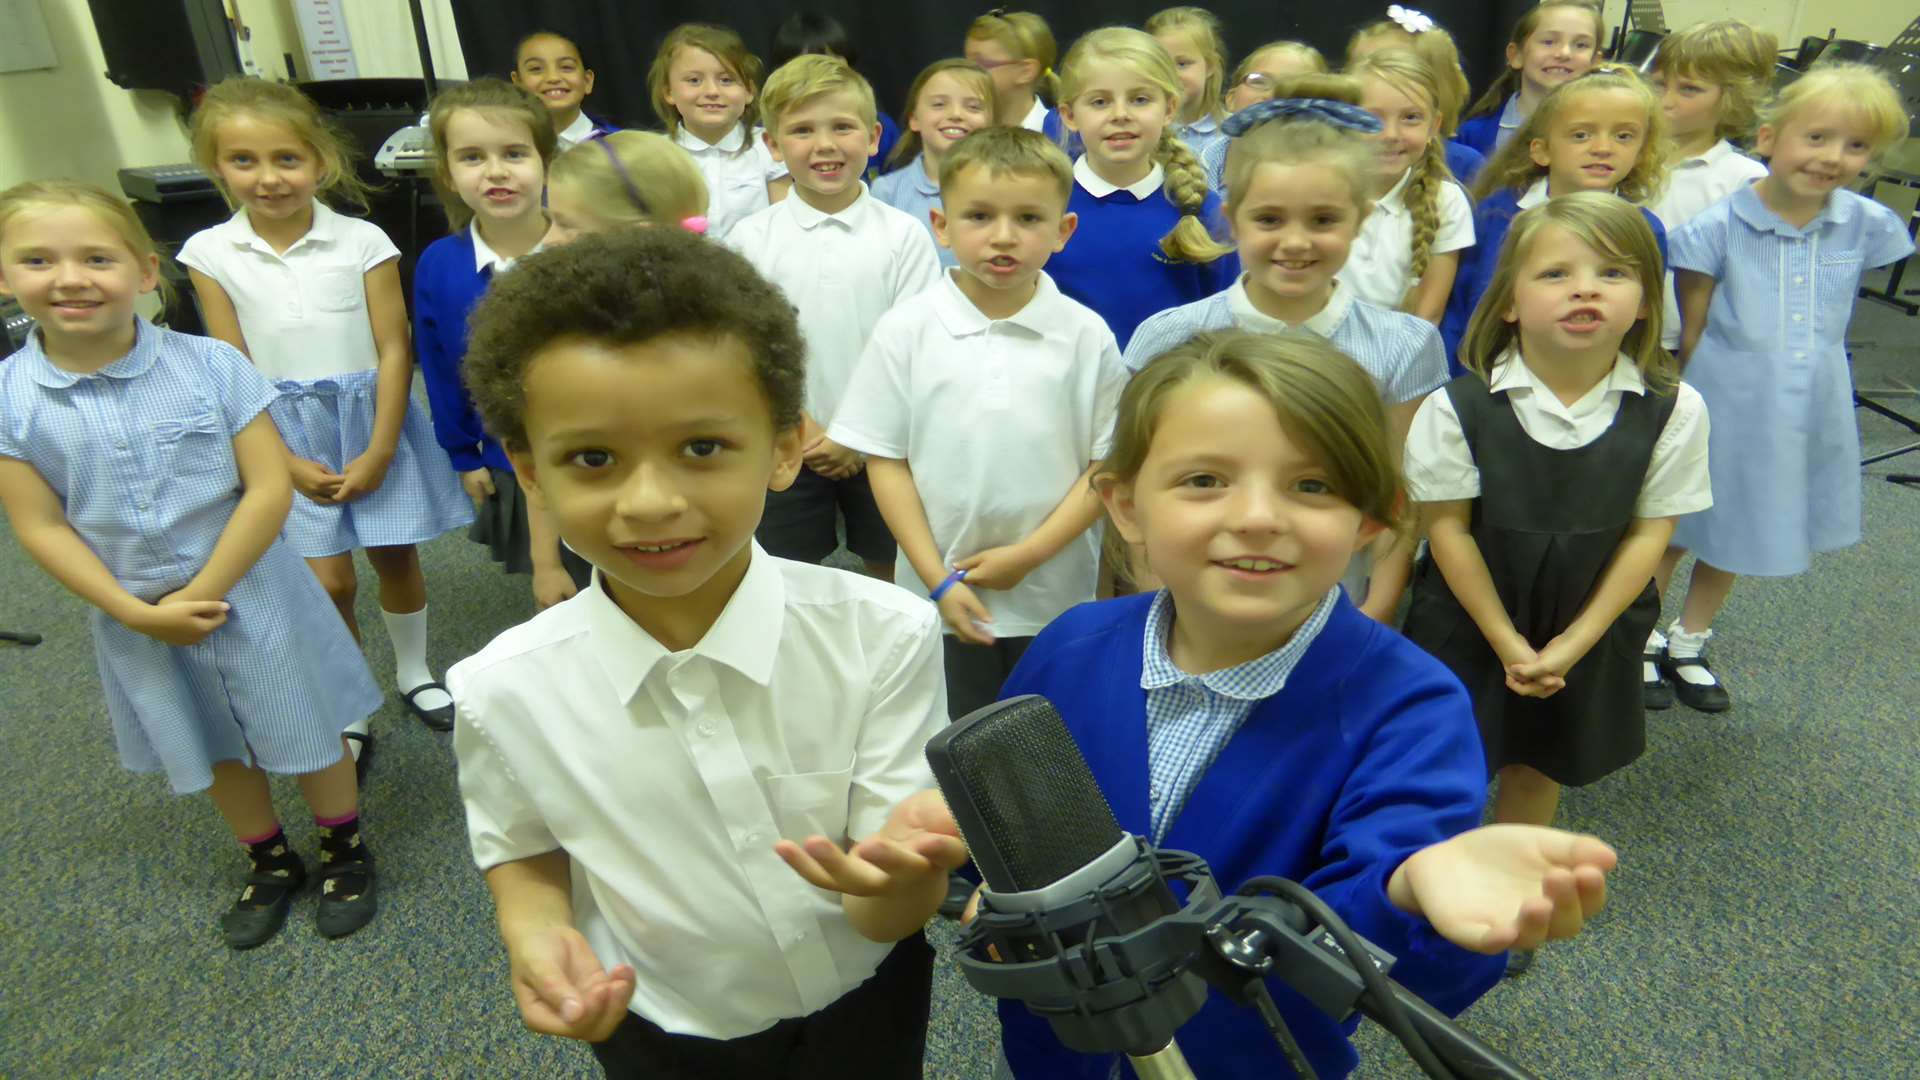 Pupils from Featherby Infants School, Gillingham, perform their version of Walking on Sunshine in the recording studio for the final of the KM Walk to School Song Contest.